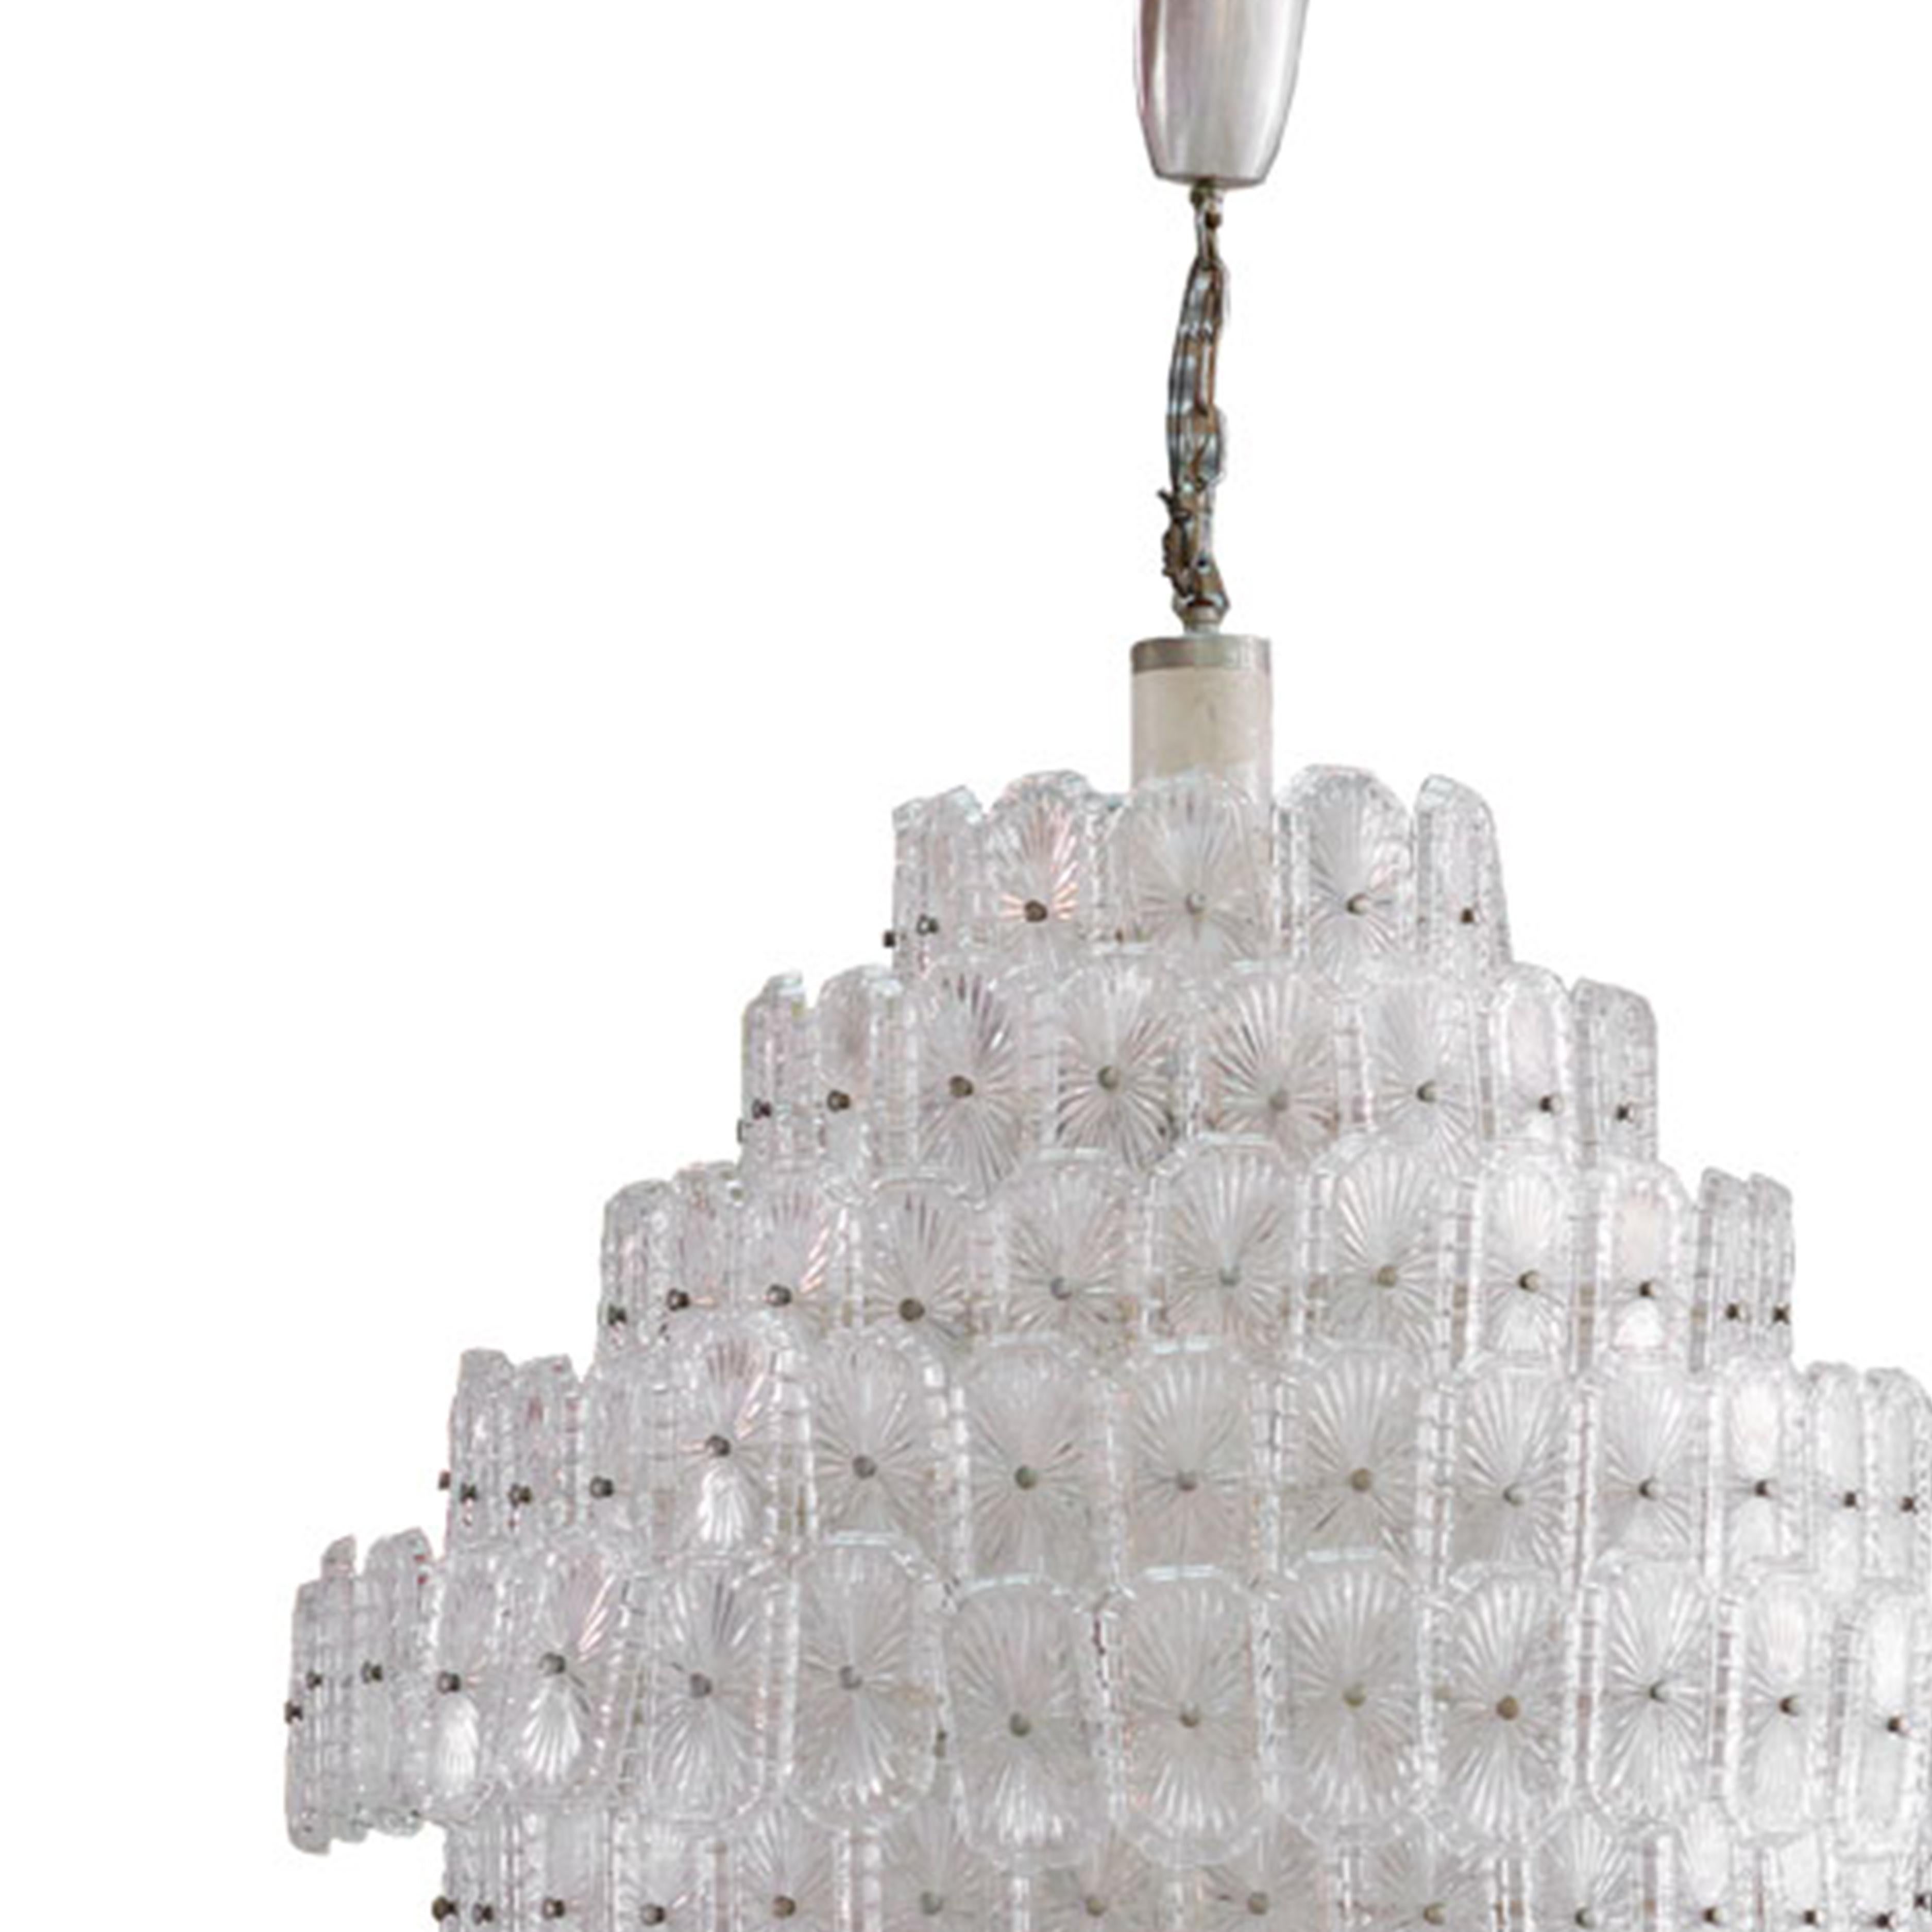 Italian Murano glass lamps. Composed of glass hand carved pieces and white lacquered structure, Italy, 1960s.

Our main target is customer satisfaction, so we include in the price for this item professional and custom made packing.